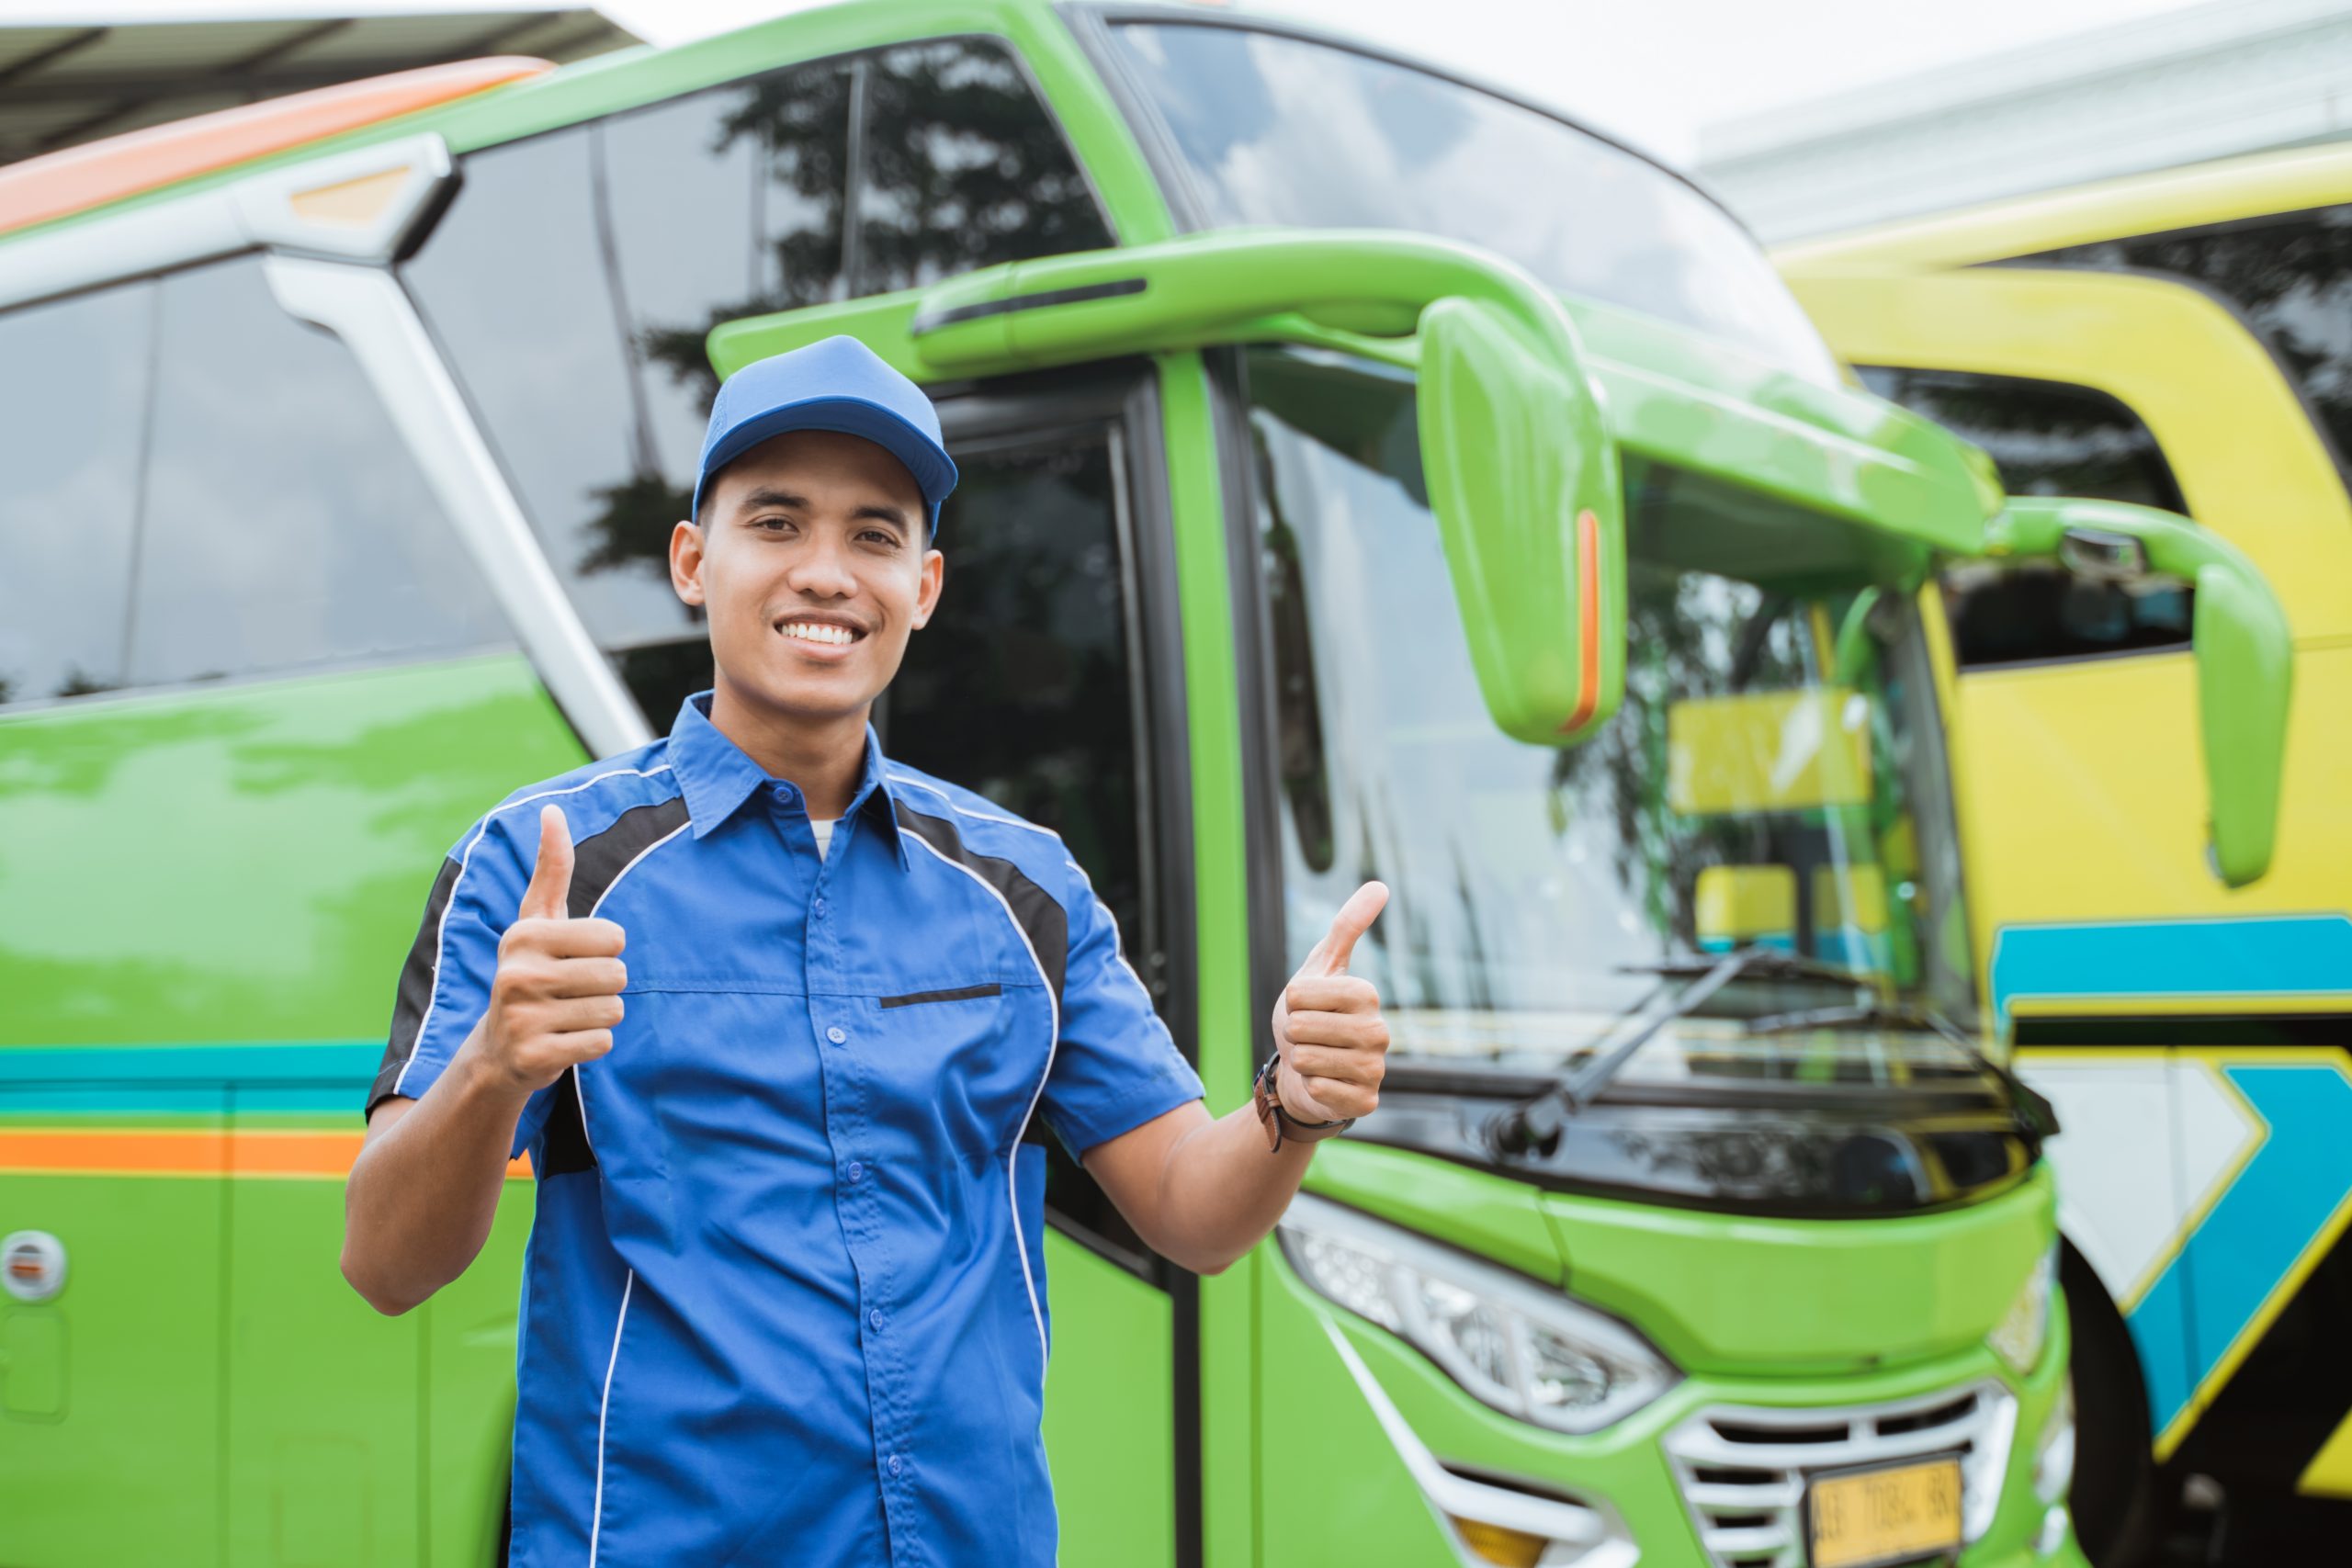 A handsome bus driver in uniform and hat smiles with thumbs up against the background of the bus